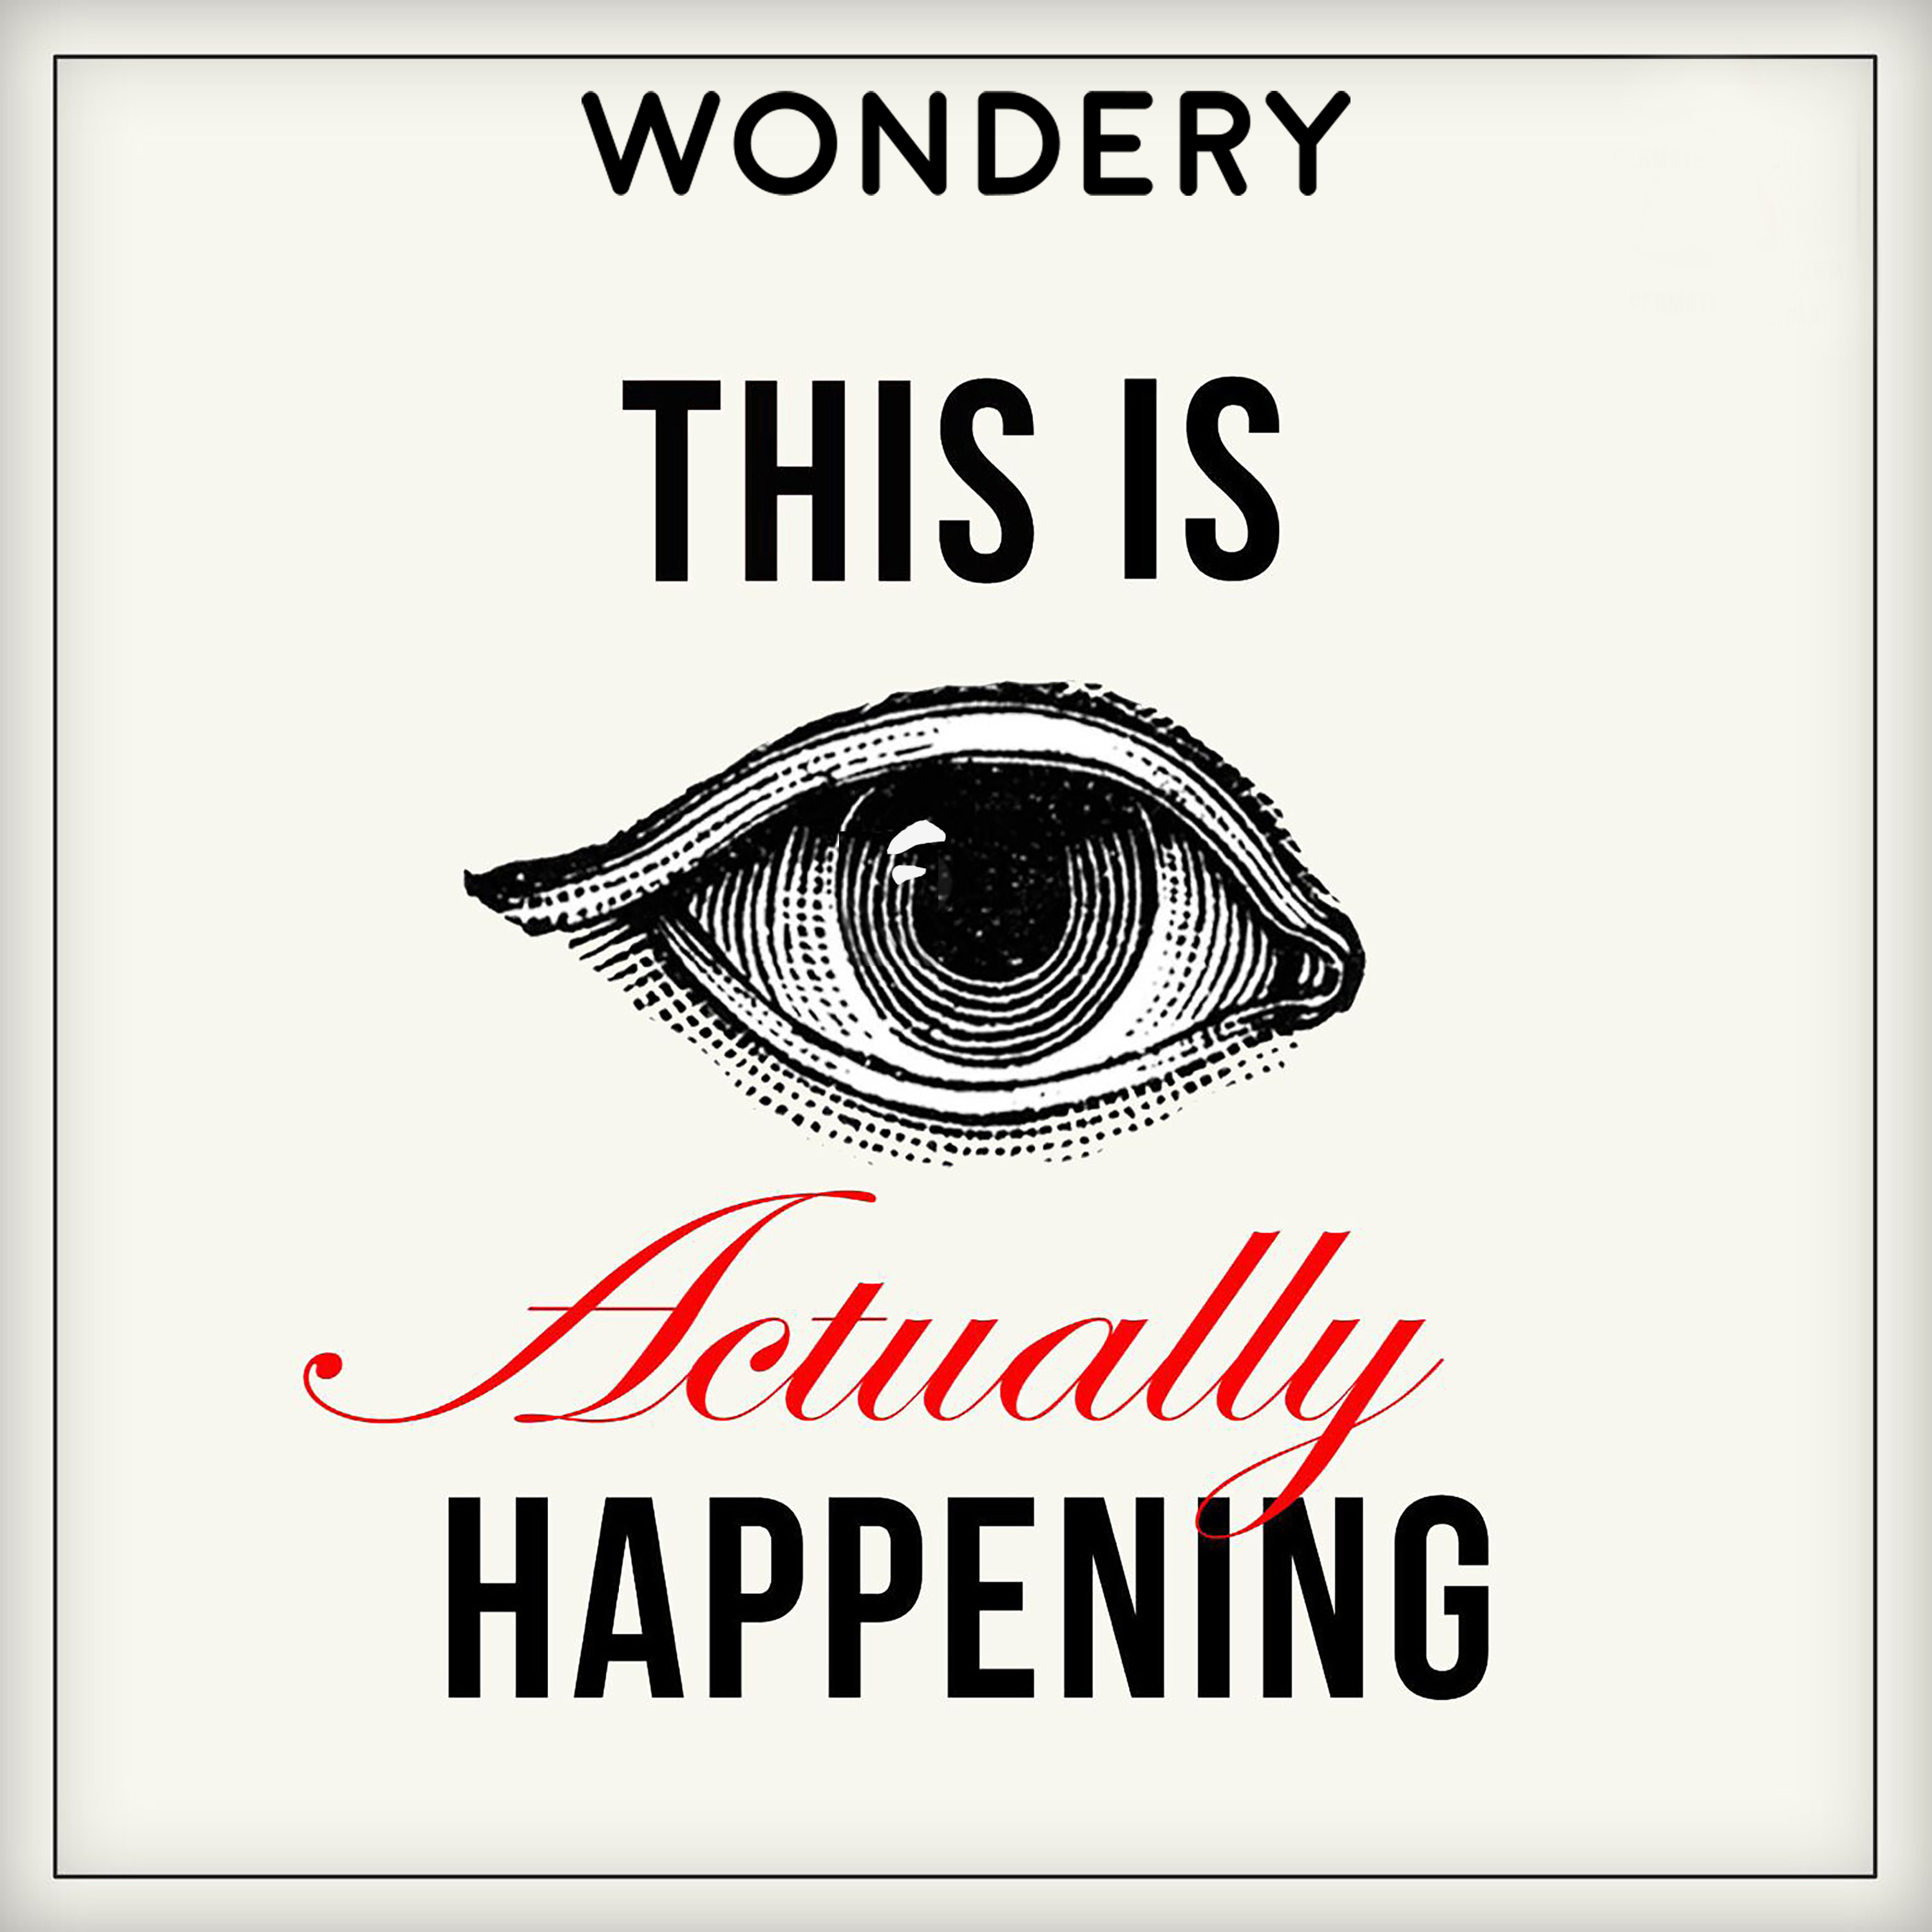 248: What if an invisible disease blew up your life? by Wondery